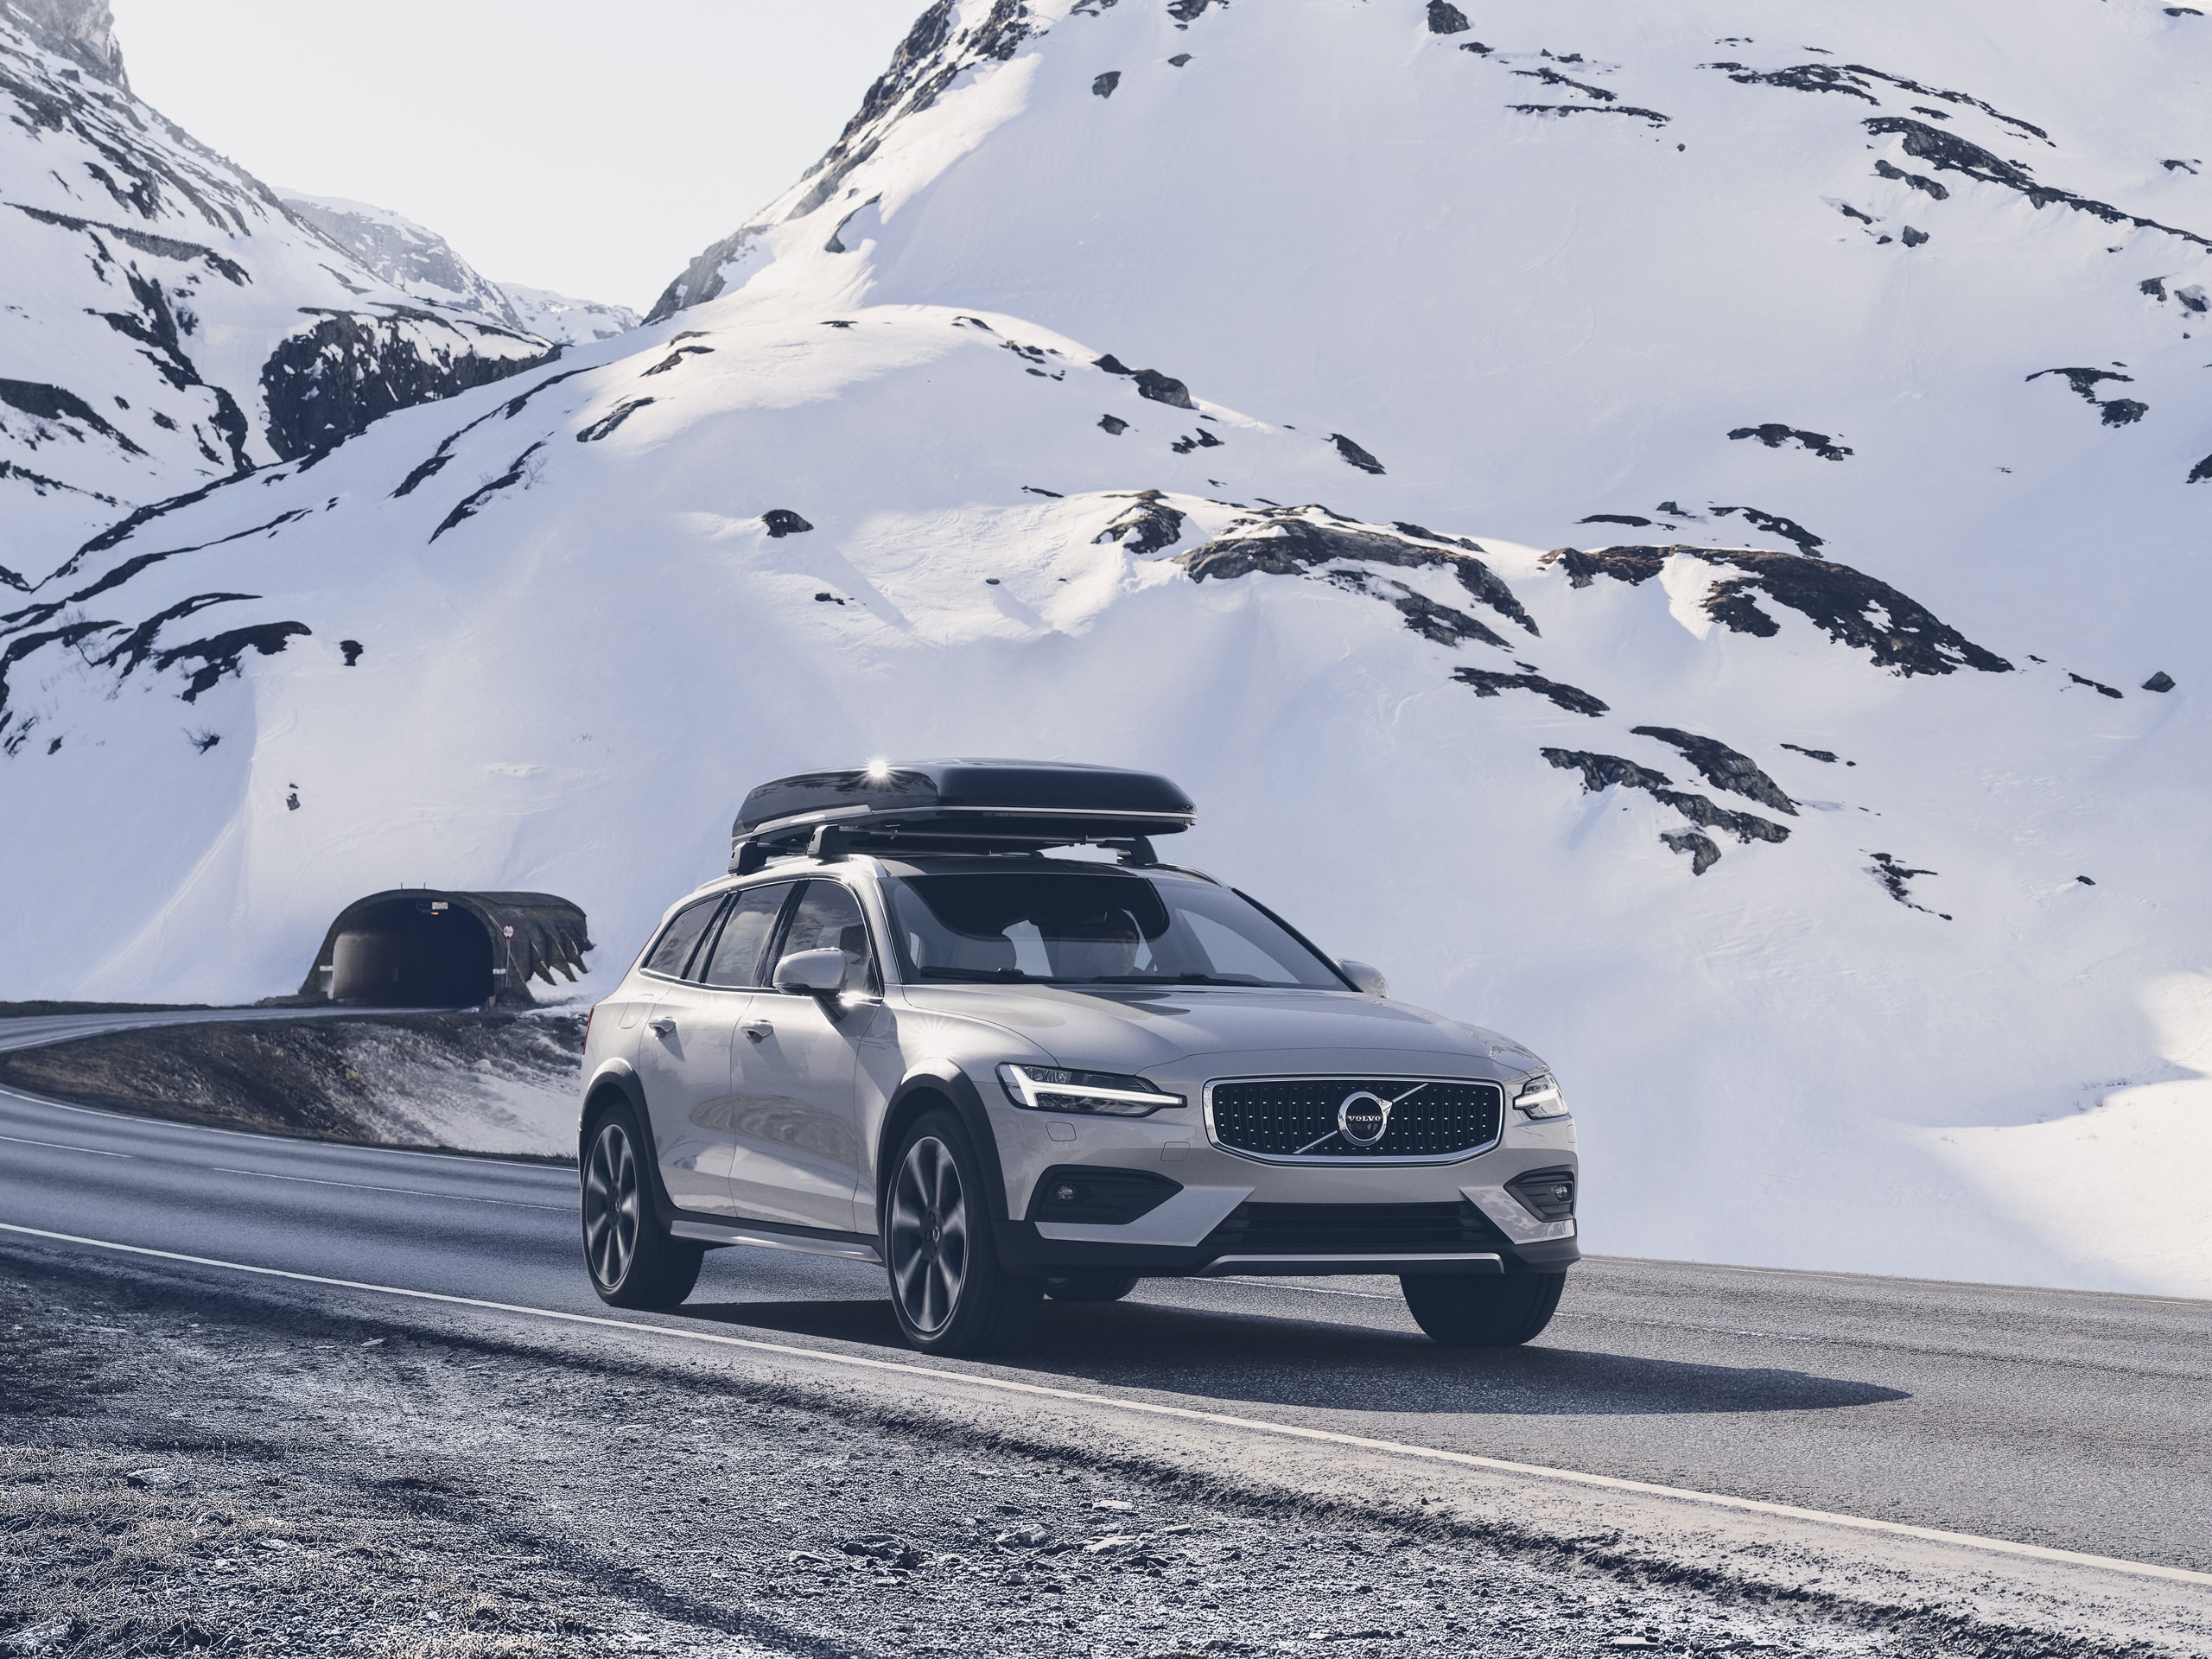 Volvo V60 Cross Country with roof box on a snowy mountain road